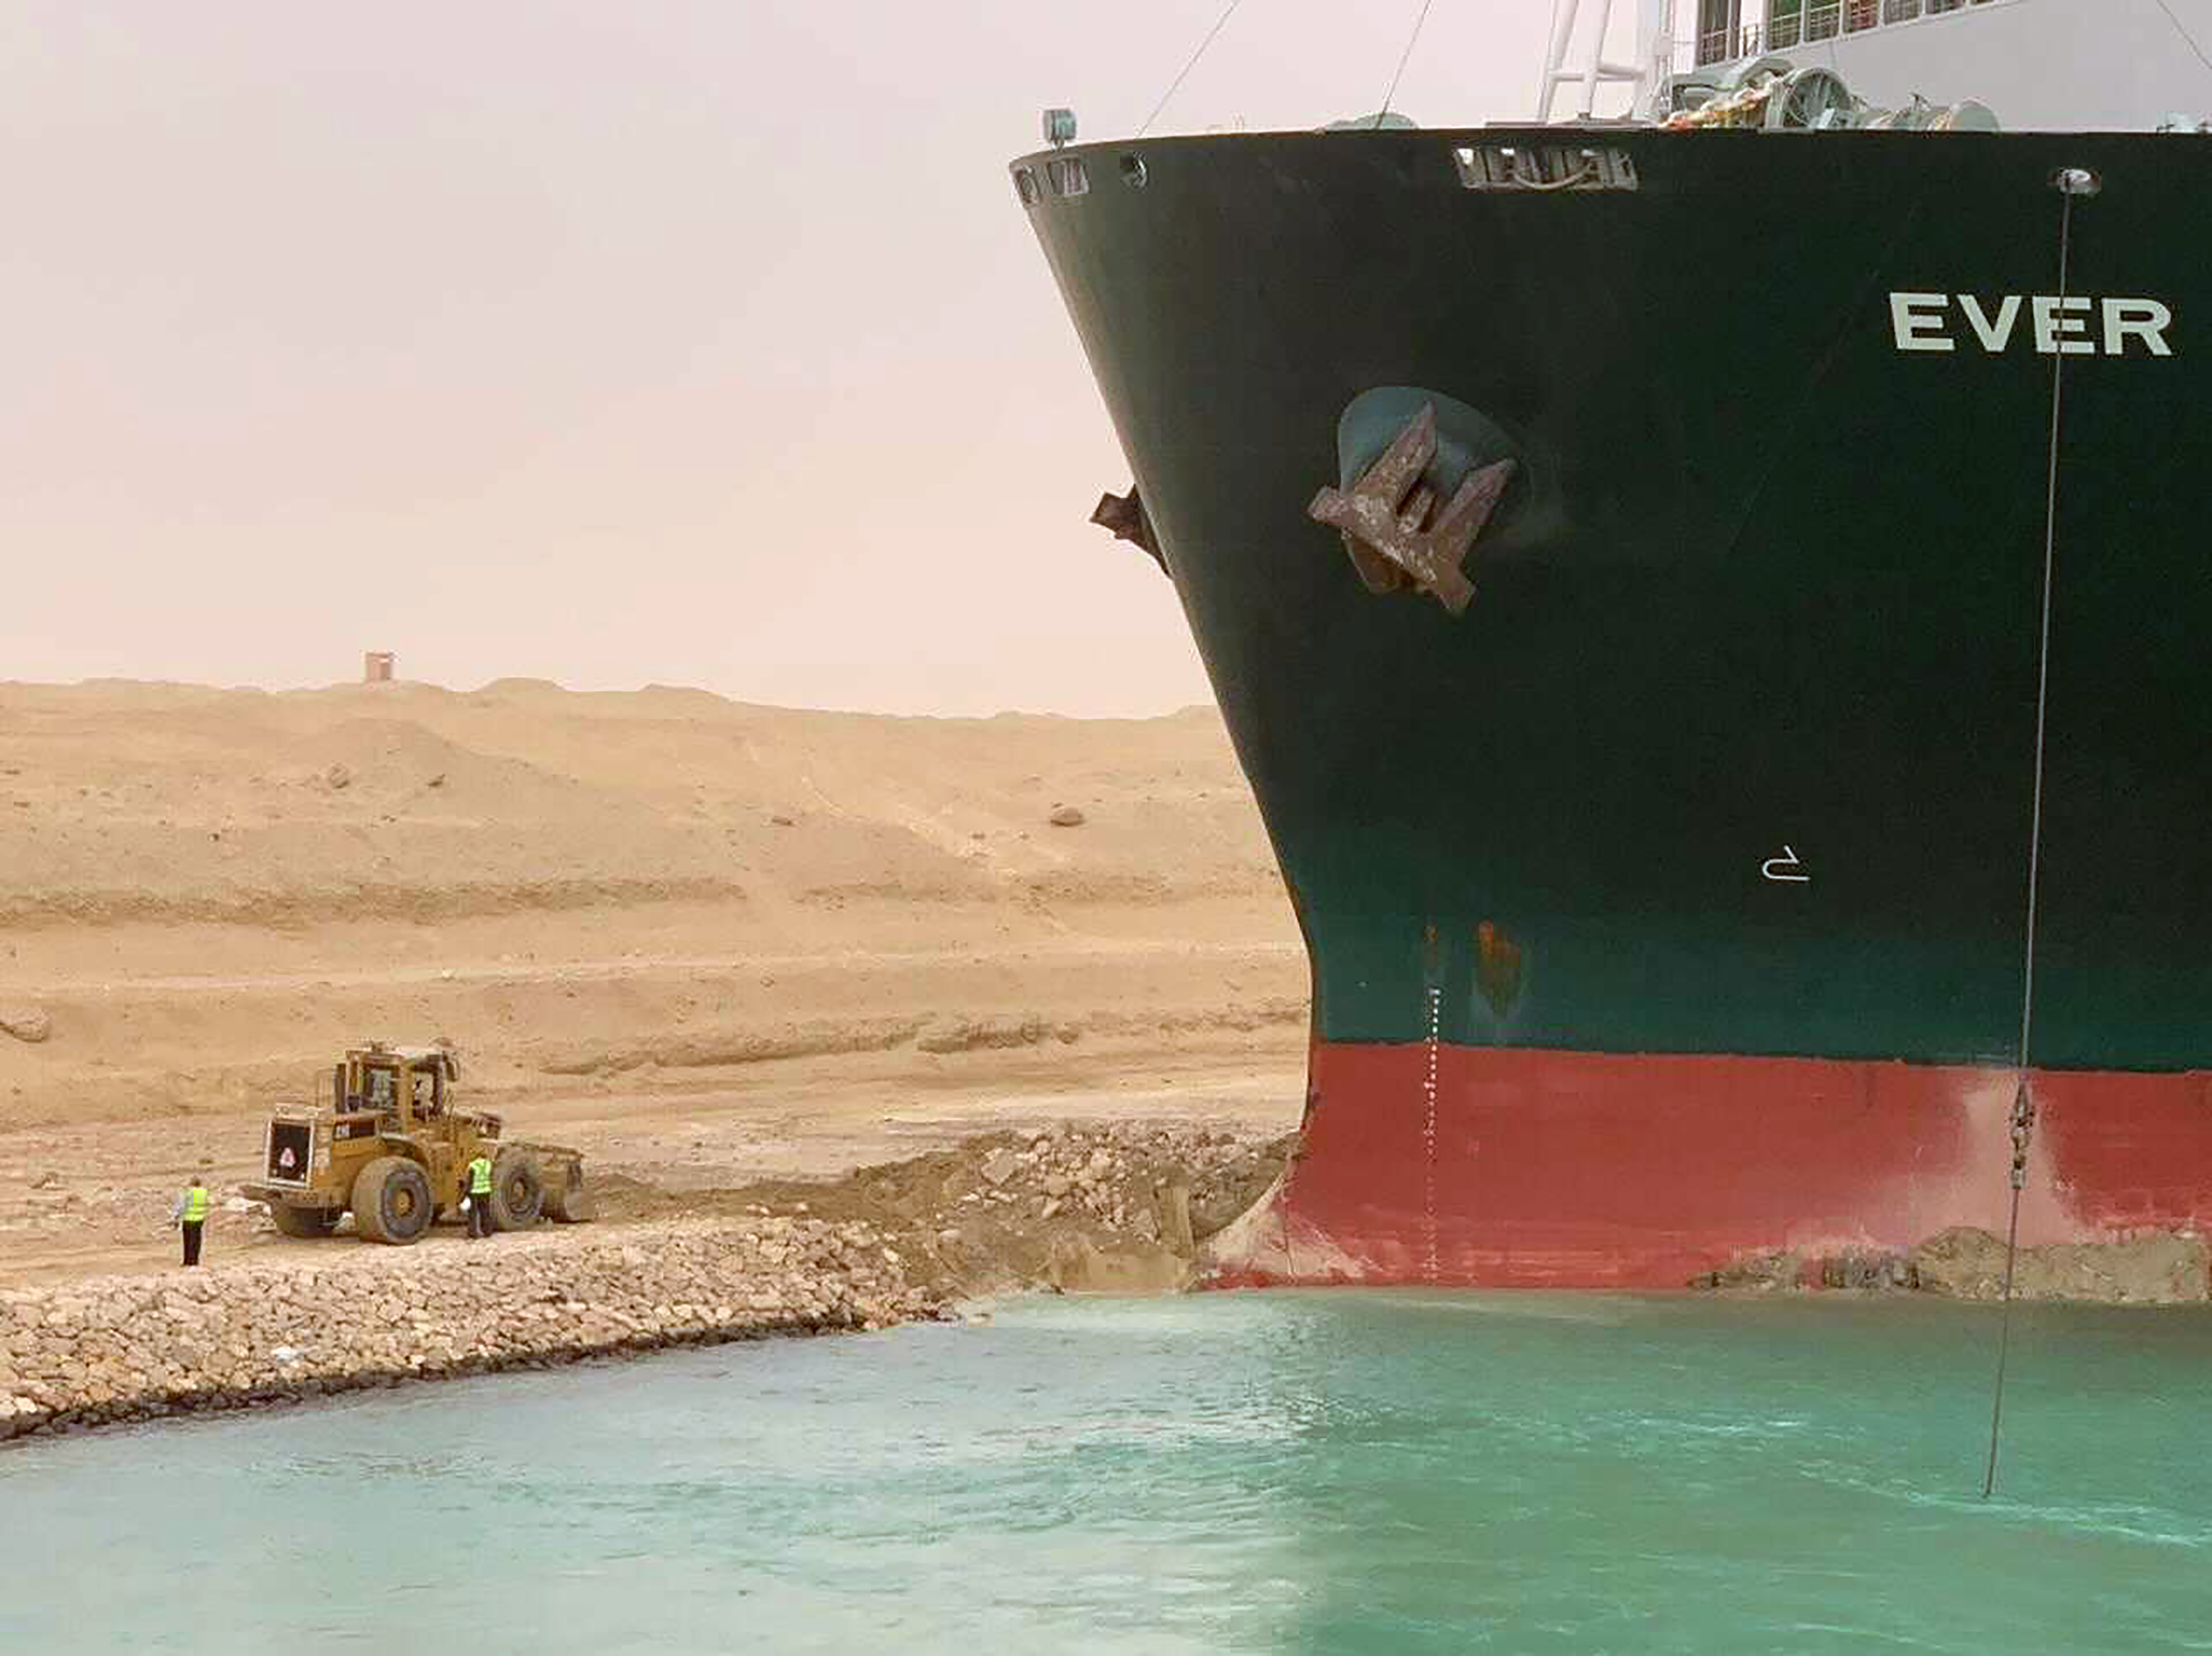 A Massive Cargo Ship Stuck in Egypt's Suez Canal Is Imperiling Shipping Worldwide